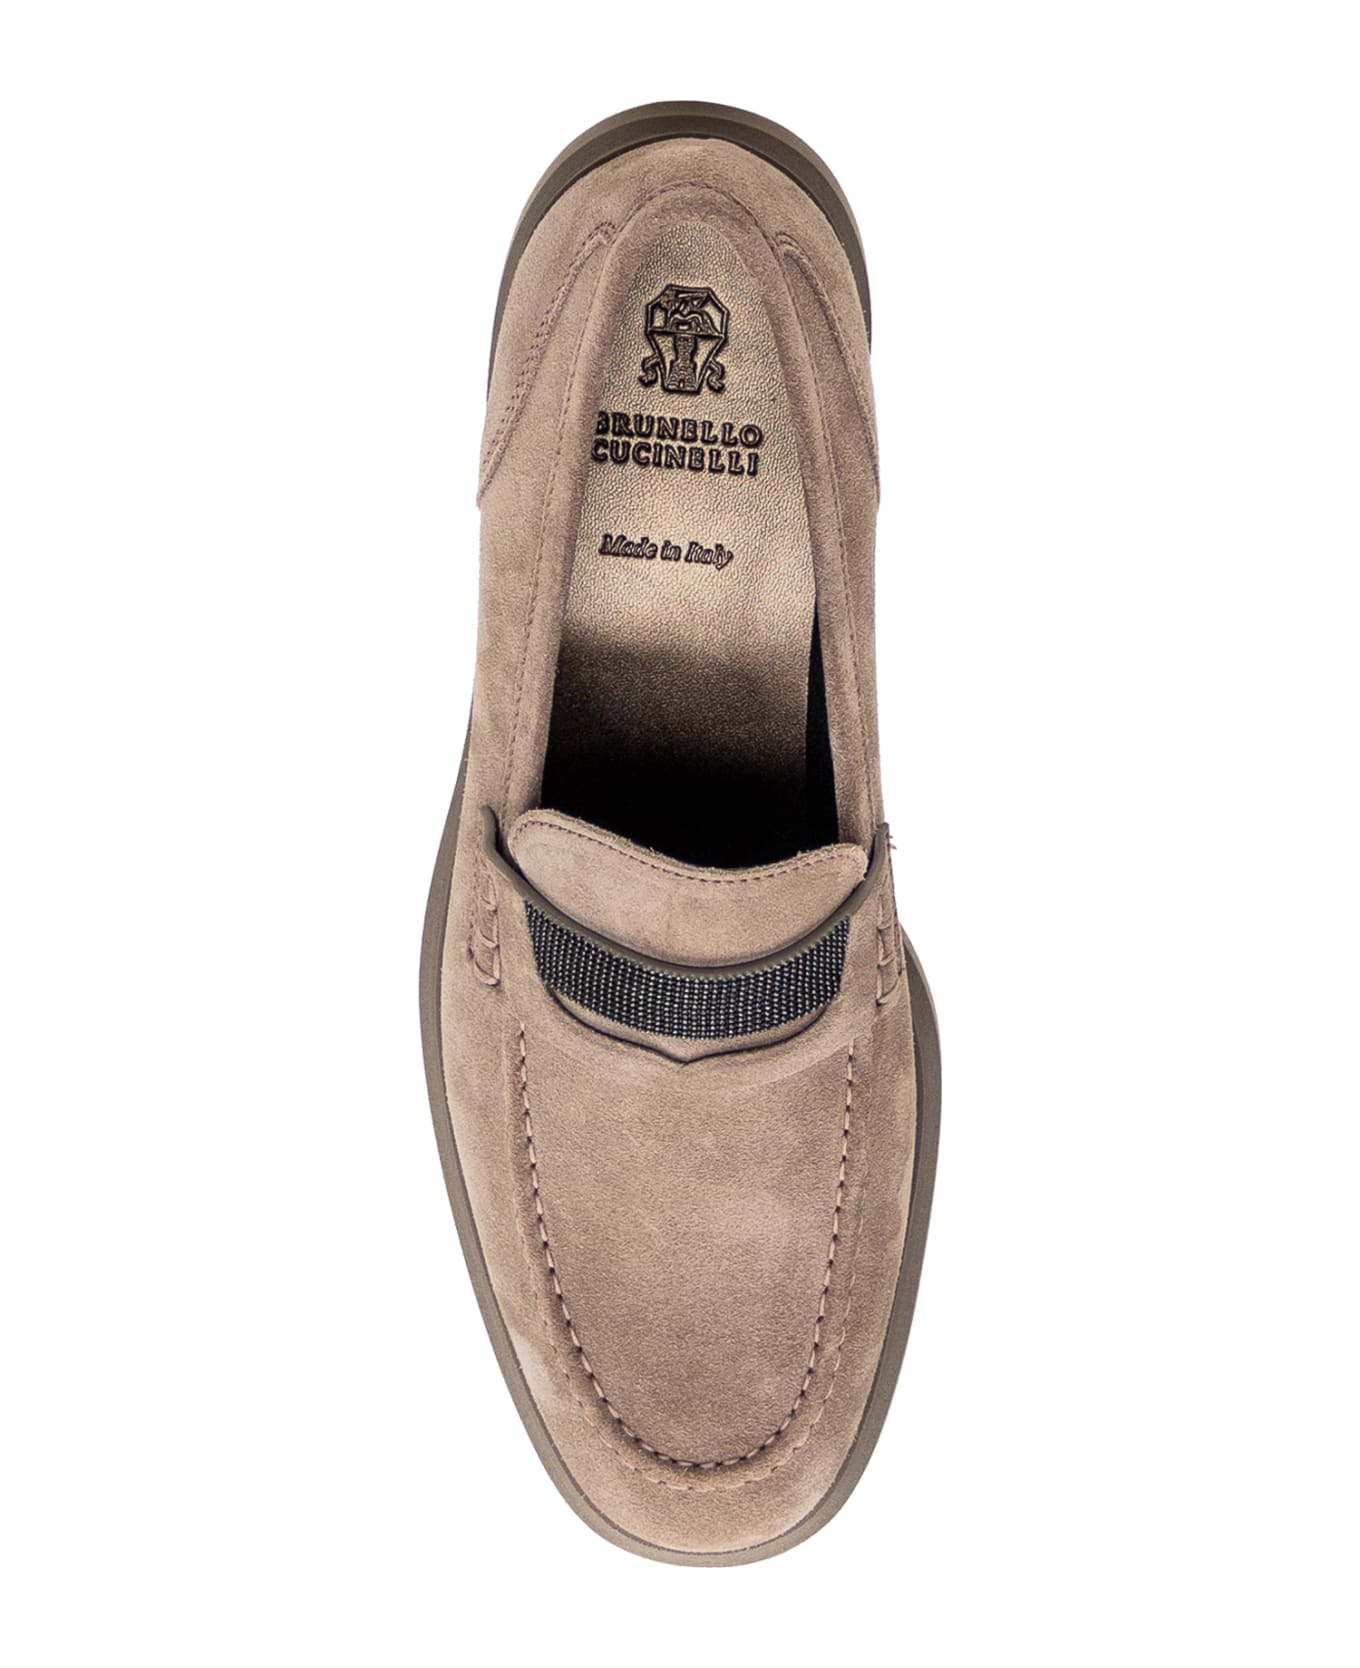 Brunello Cucinelli Penny Loafer - Ice フラットシューズ